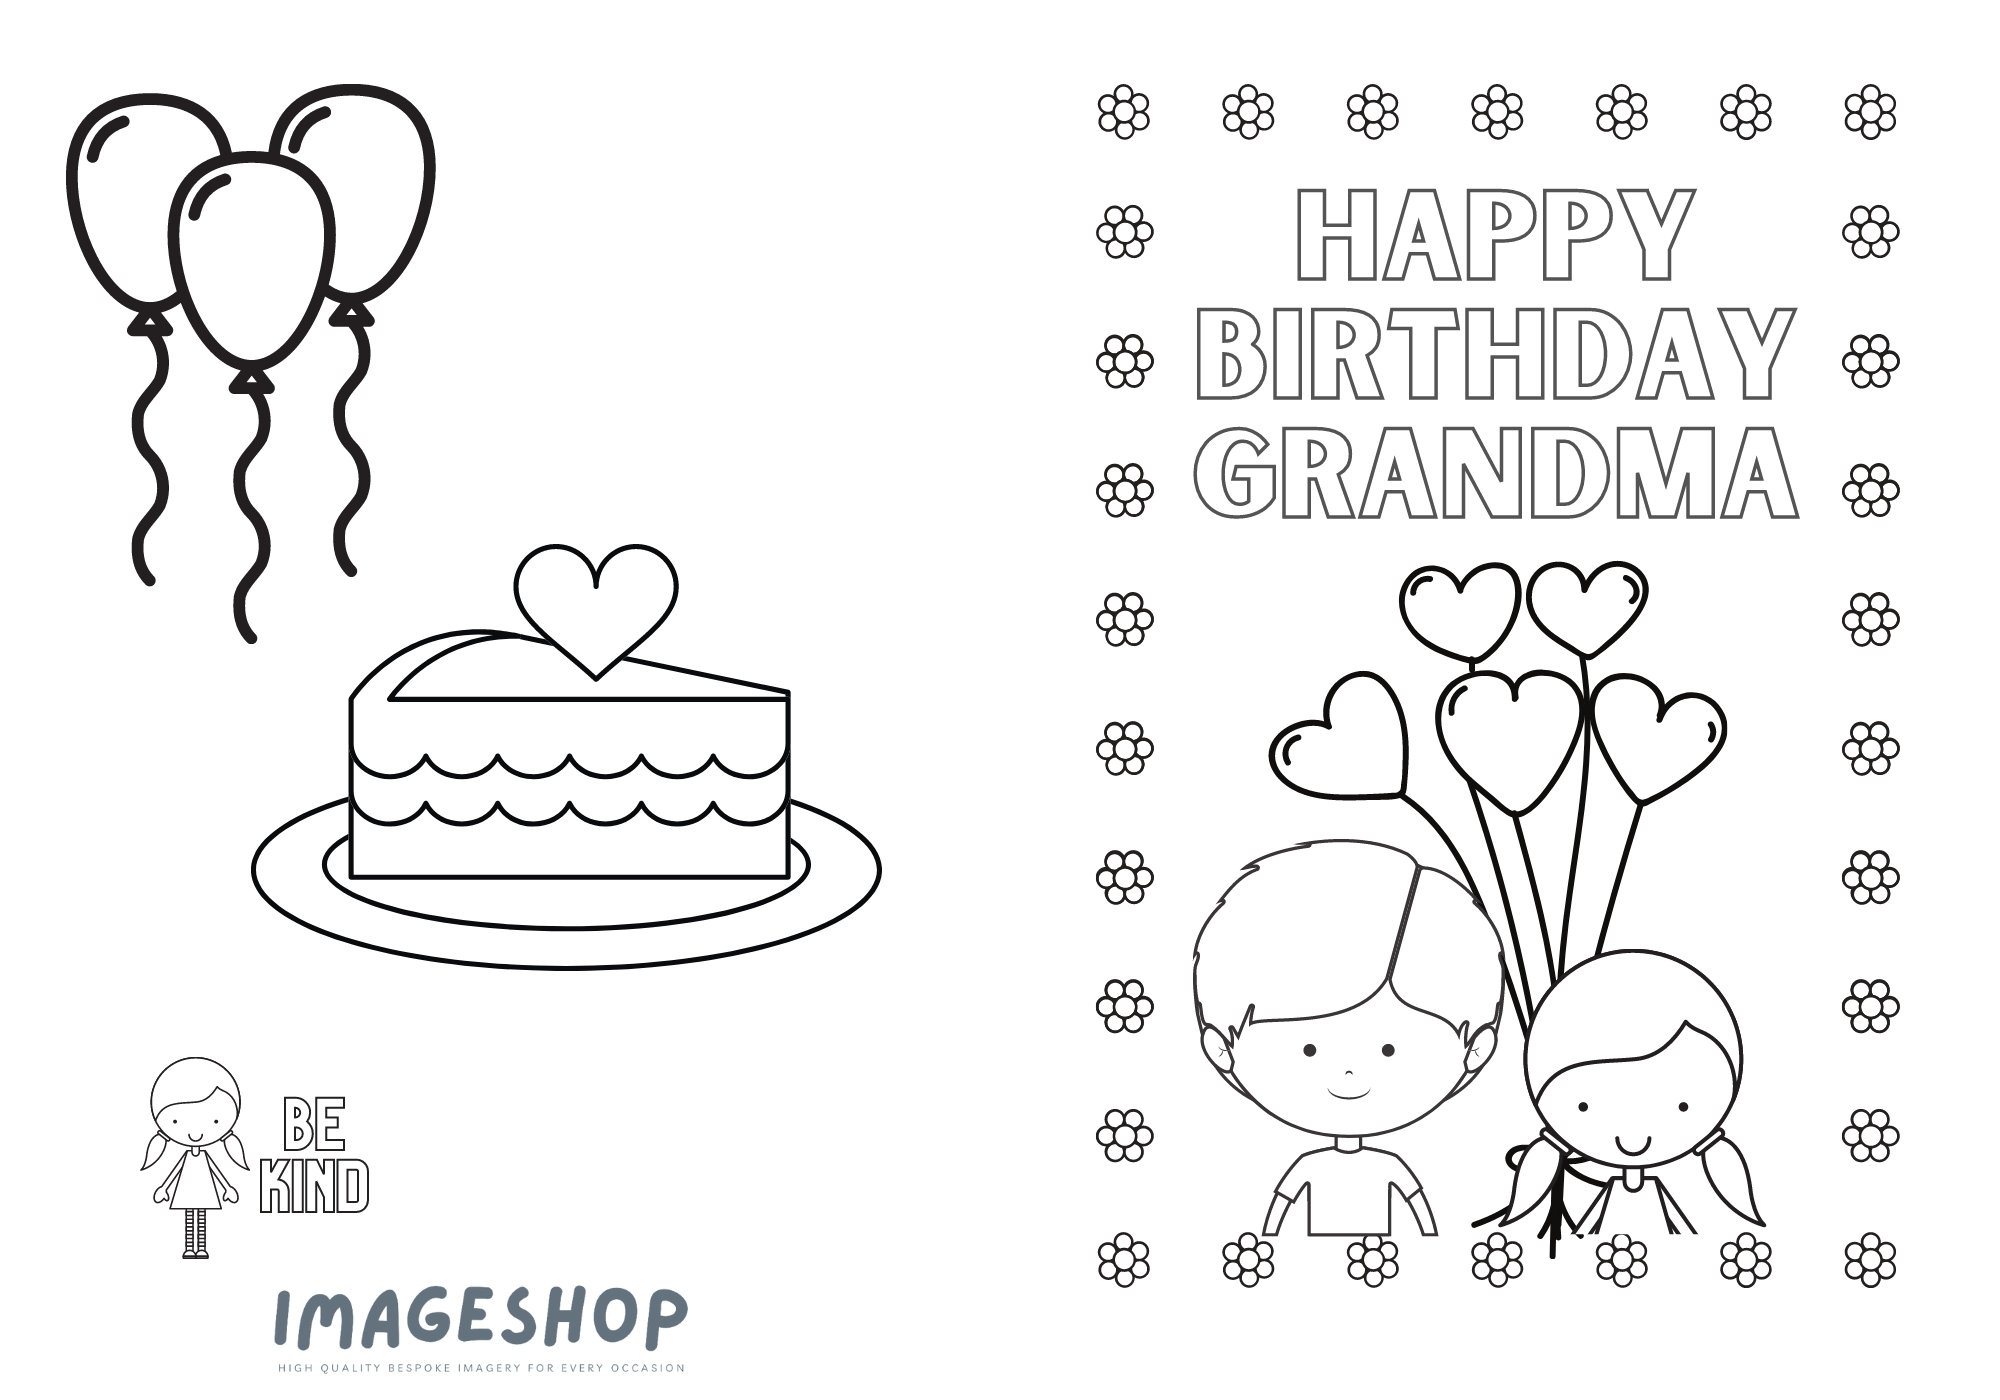 Grandma Birthday Card Happy Birthday Colour In Card Instant Download Printable Card Colouring Card Greeting Card Personalised Card Etsy Norway